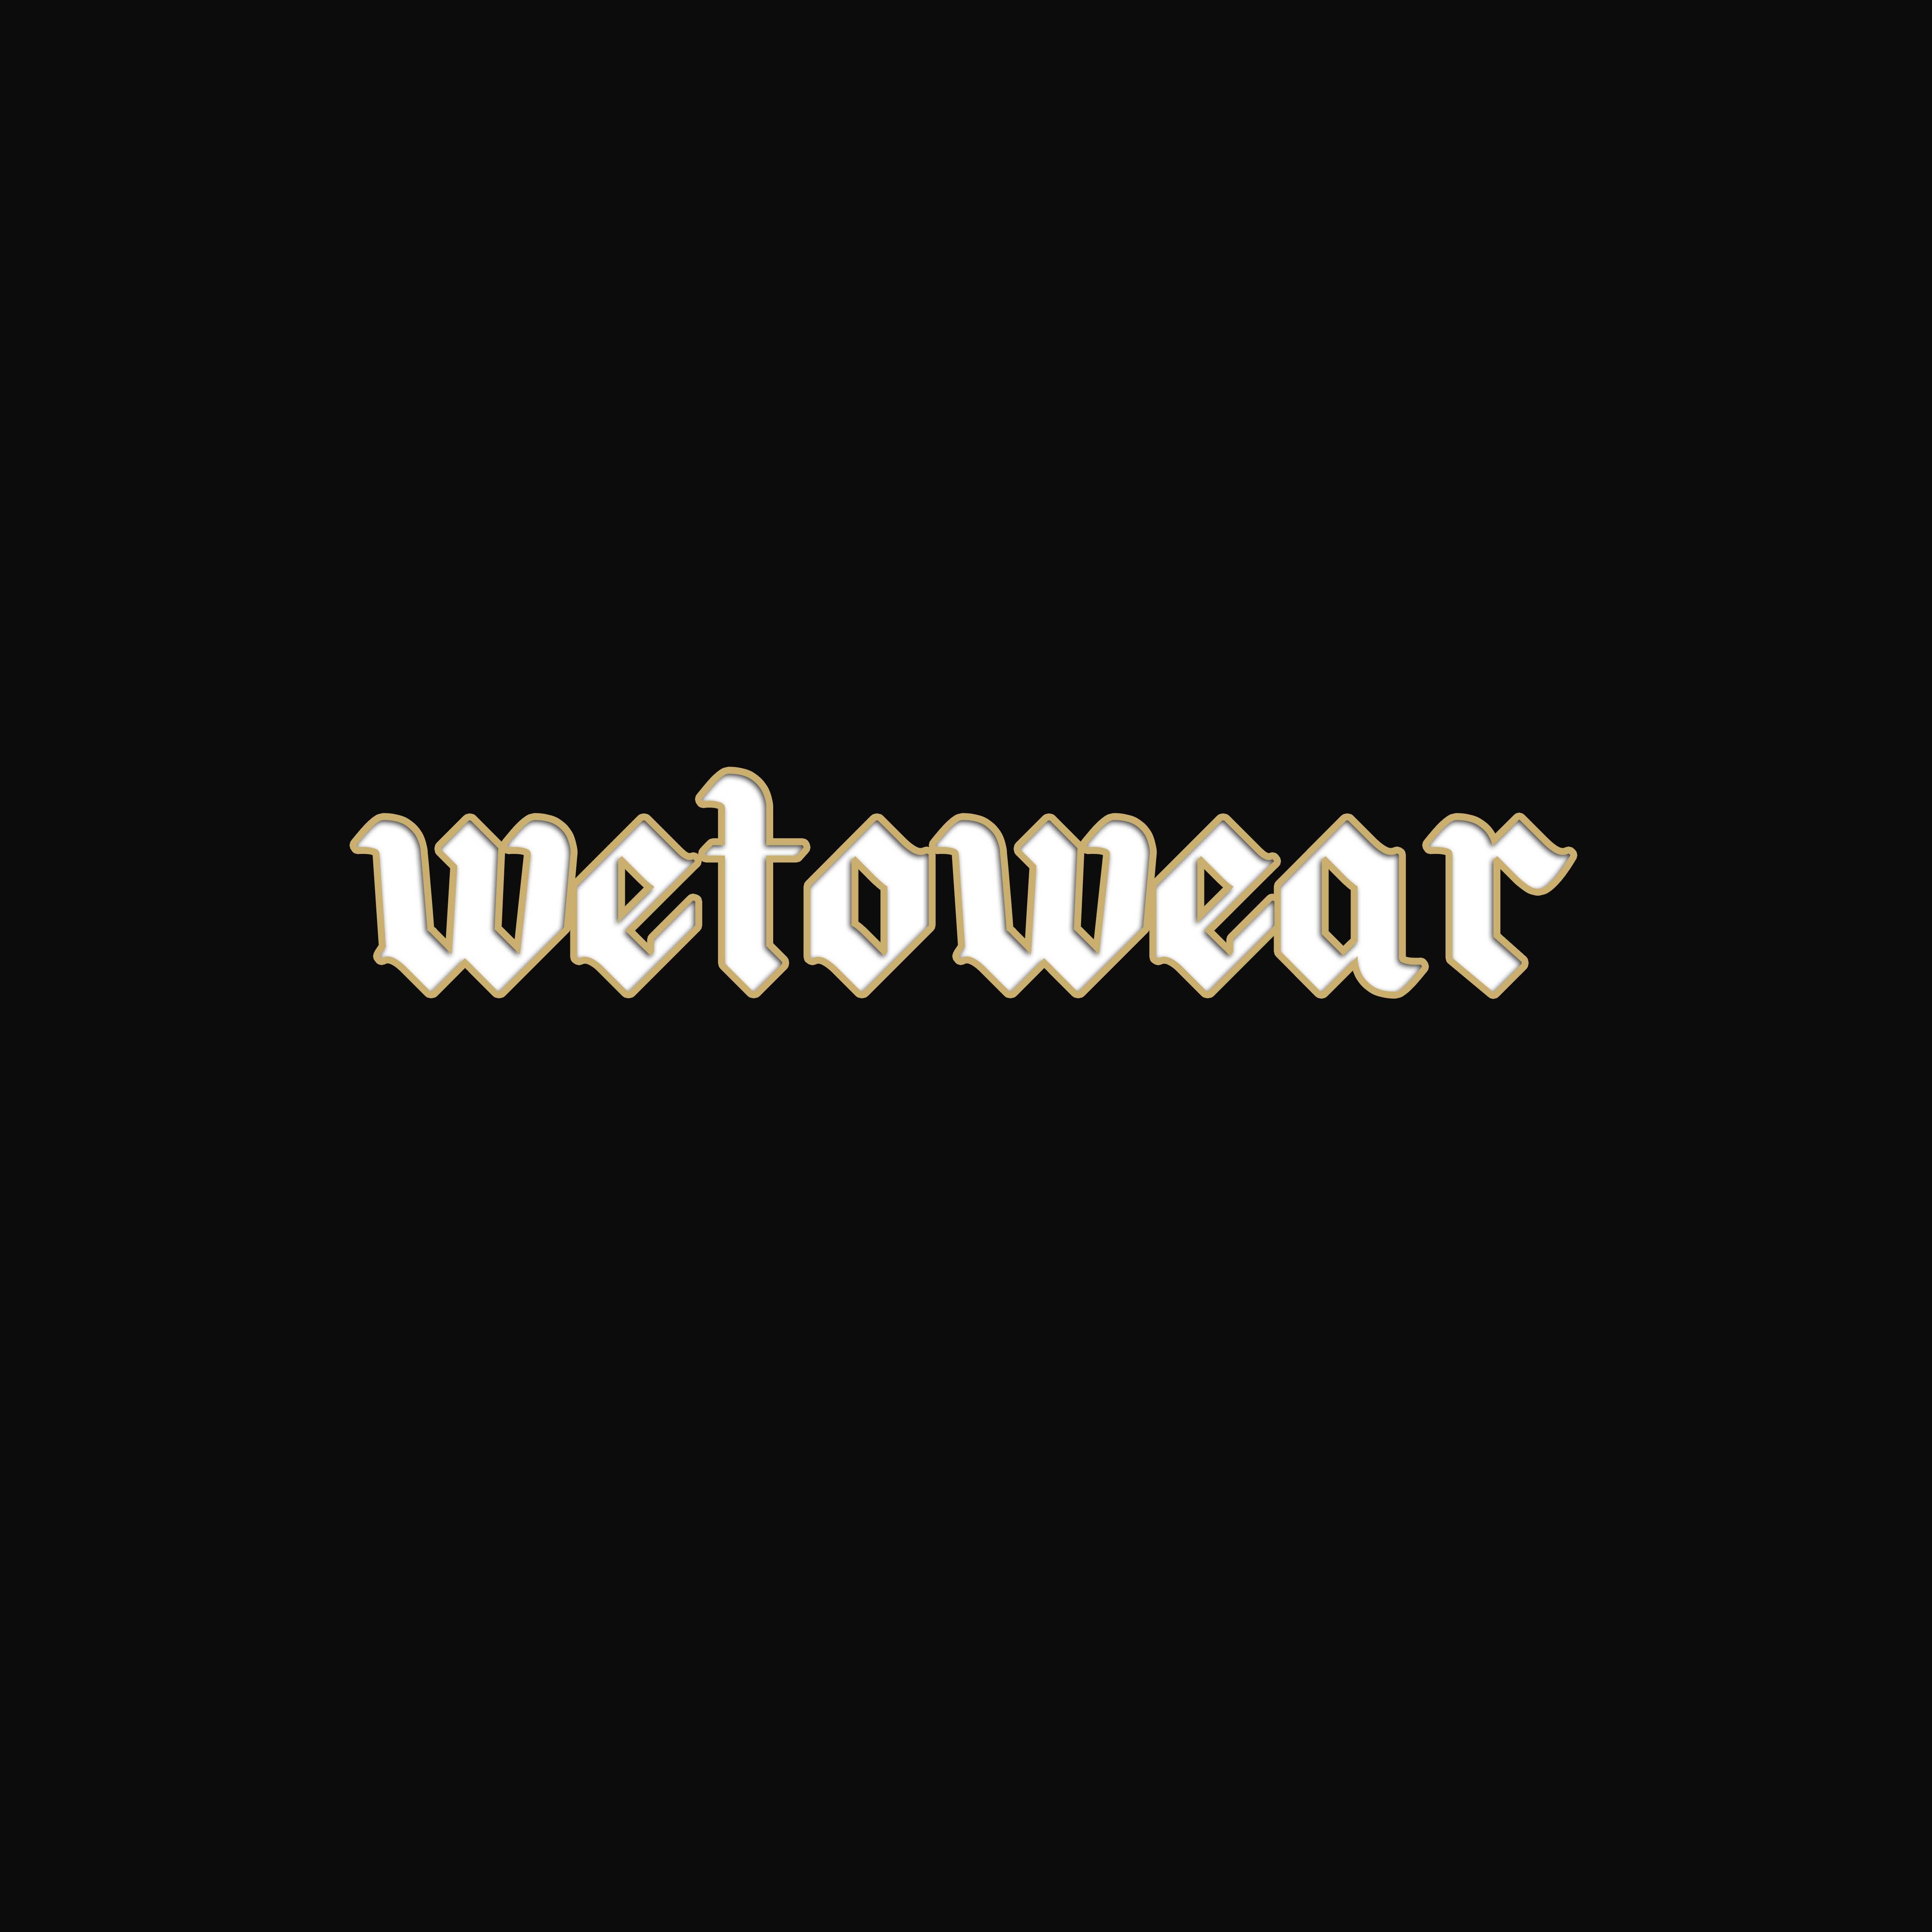 Why choose the brand wetowear?